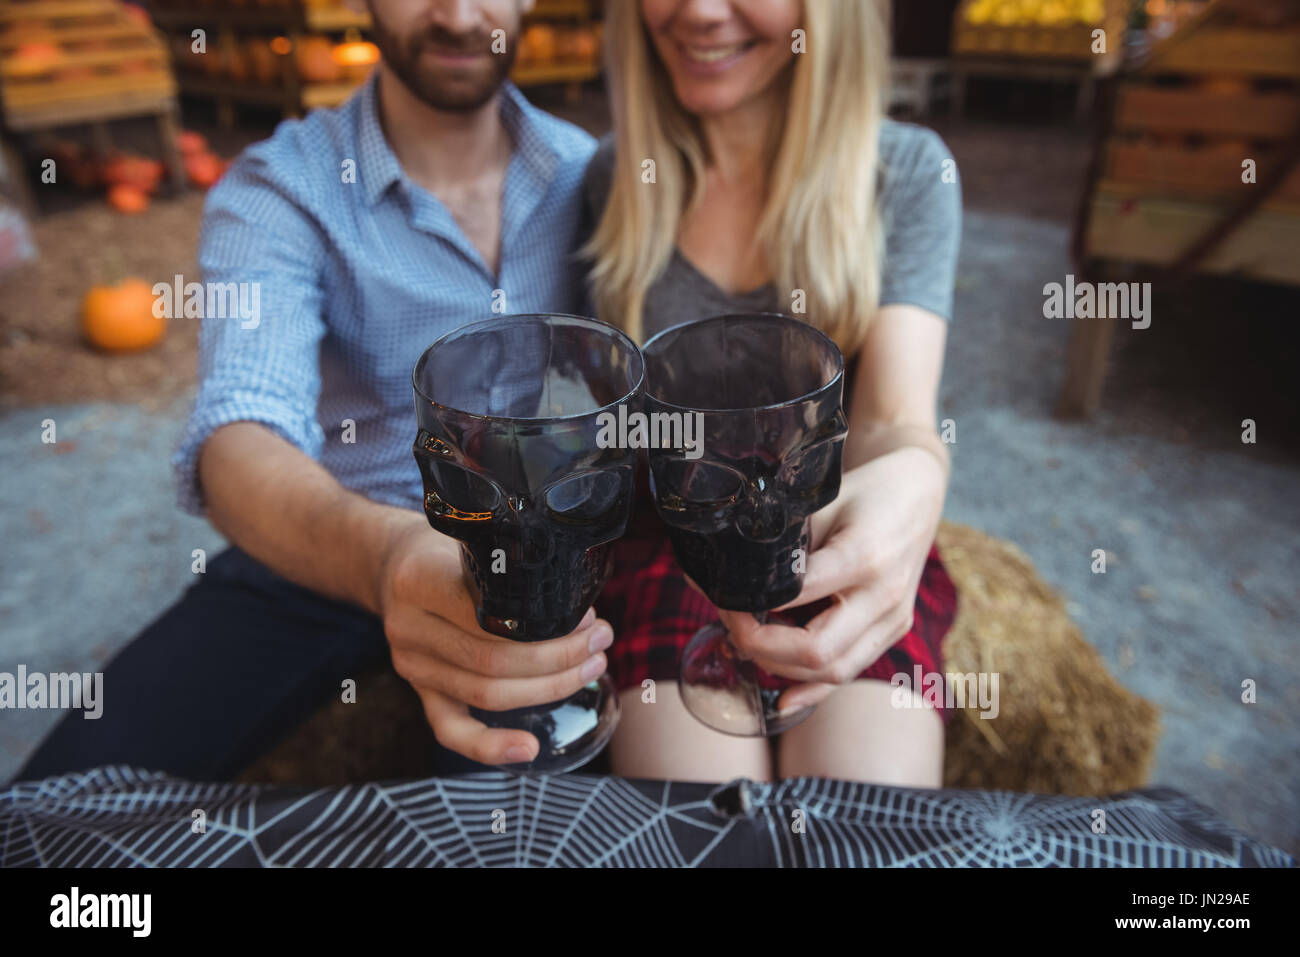 Couple toasting a glasses of wine Stock Photo